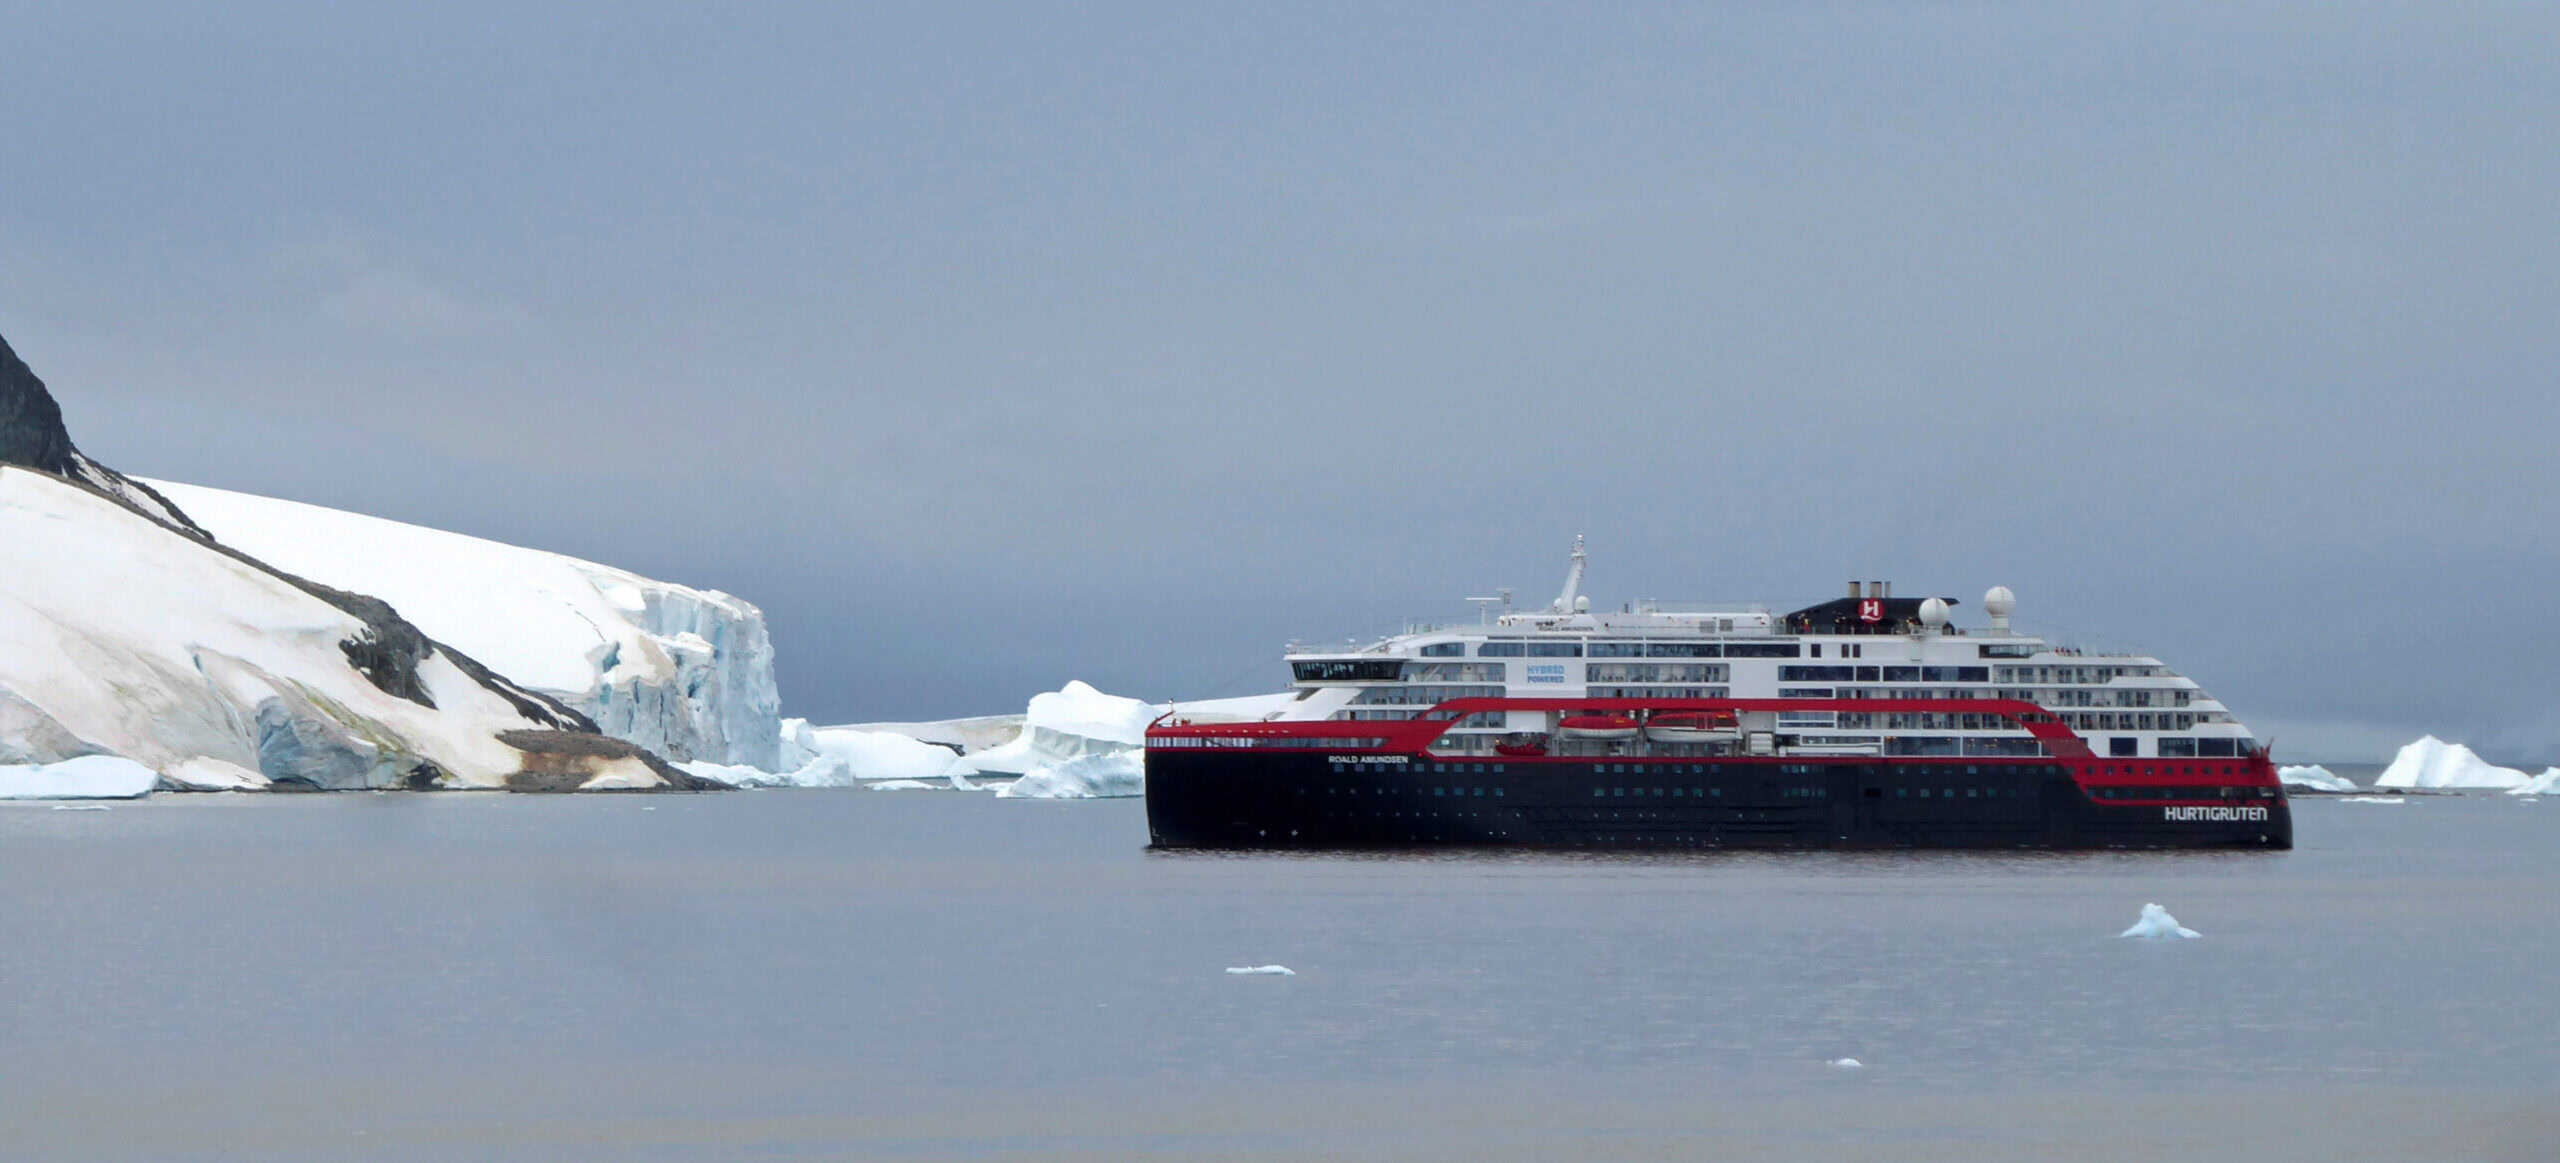 <p>One of the most unique ships sailing today, the MS Roald Amundsen will offer you a 94-night pole-to-pole trip. With suite pricing starting at $69,590 per person, you get to sail from Vancouver to Buenos Aires, Argentina. During the 94-night voyage, you'll find plenty of stops along the way including multiple opportunities to visit over a dozen different cities in Alaska alone.</p> <p>If you can get the Expedition Suite (XL Suite), you'll have 517 square feet to enjoy the arctic scenery. Grab an extra large corner suite and you'll have a room that can sleep up to 4 people. This includes a double bed, sofa bed, private bathroom, and espresso maker. You'll also receive complimentary fine dining in the upscale Lindstrom restaurant.</p> <p>Agree with this? Hit the Thumbs Up button above. Disagree? Let us know in the comments with what you'd change.</p>